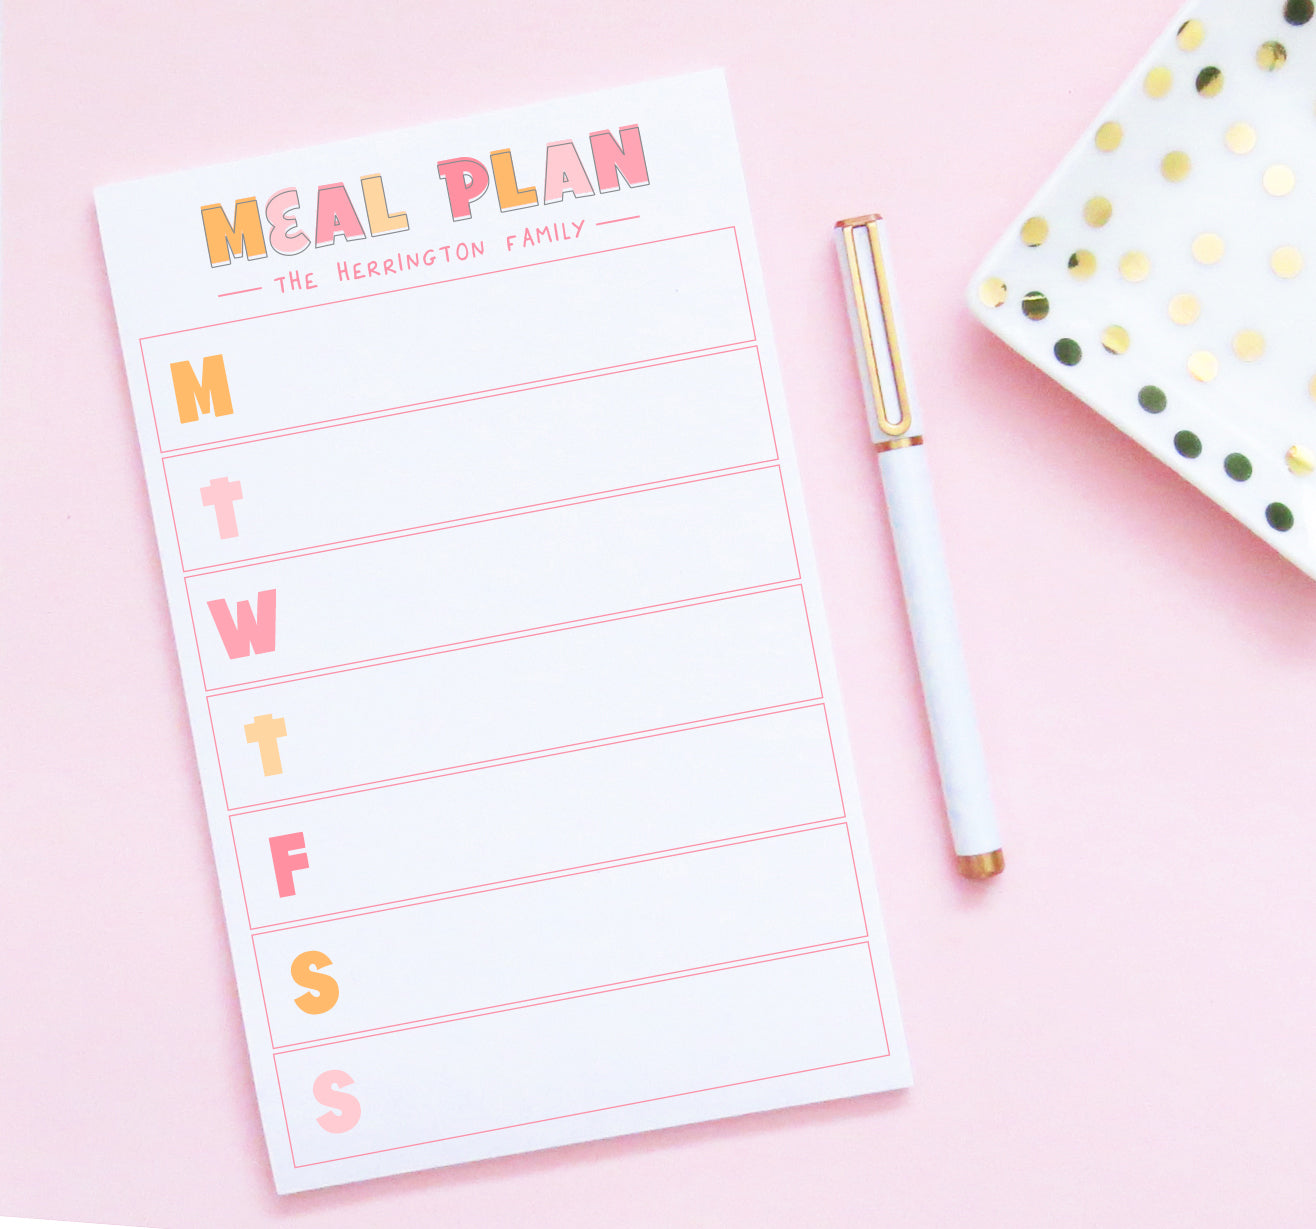 HNP007 Cute Personalized Meal Plan Notepads for Families last name